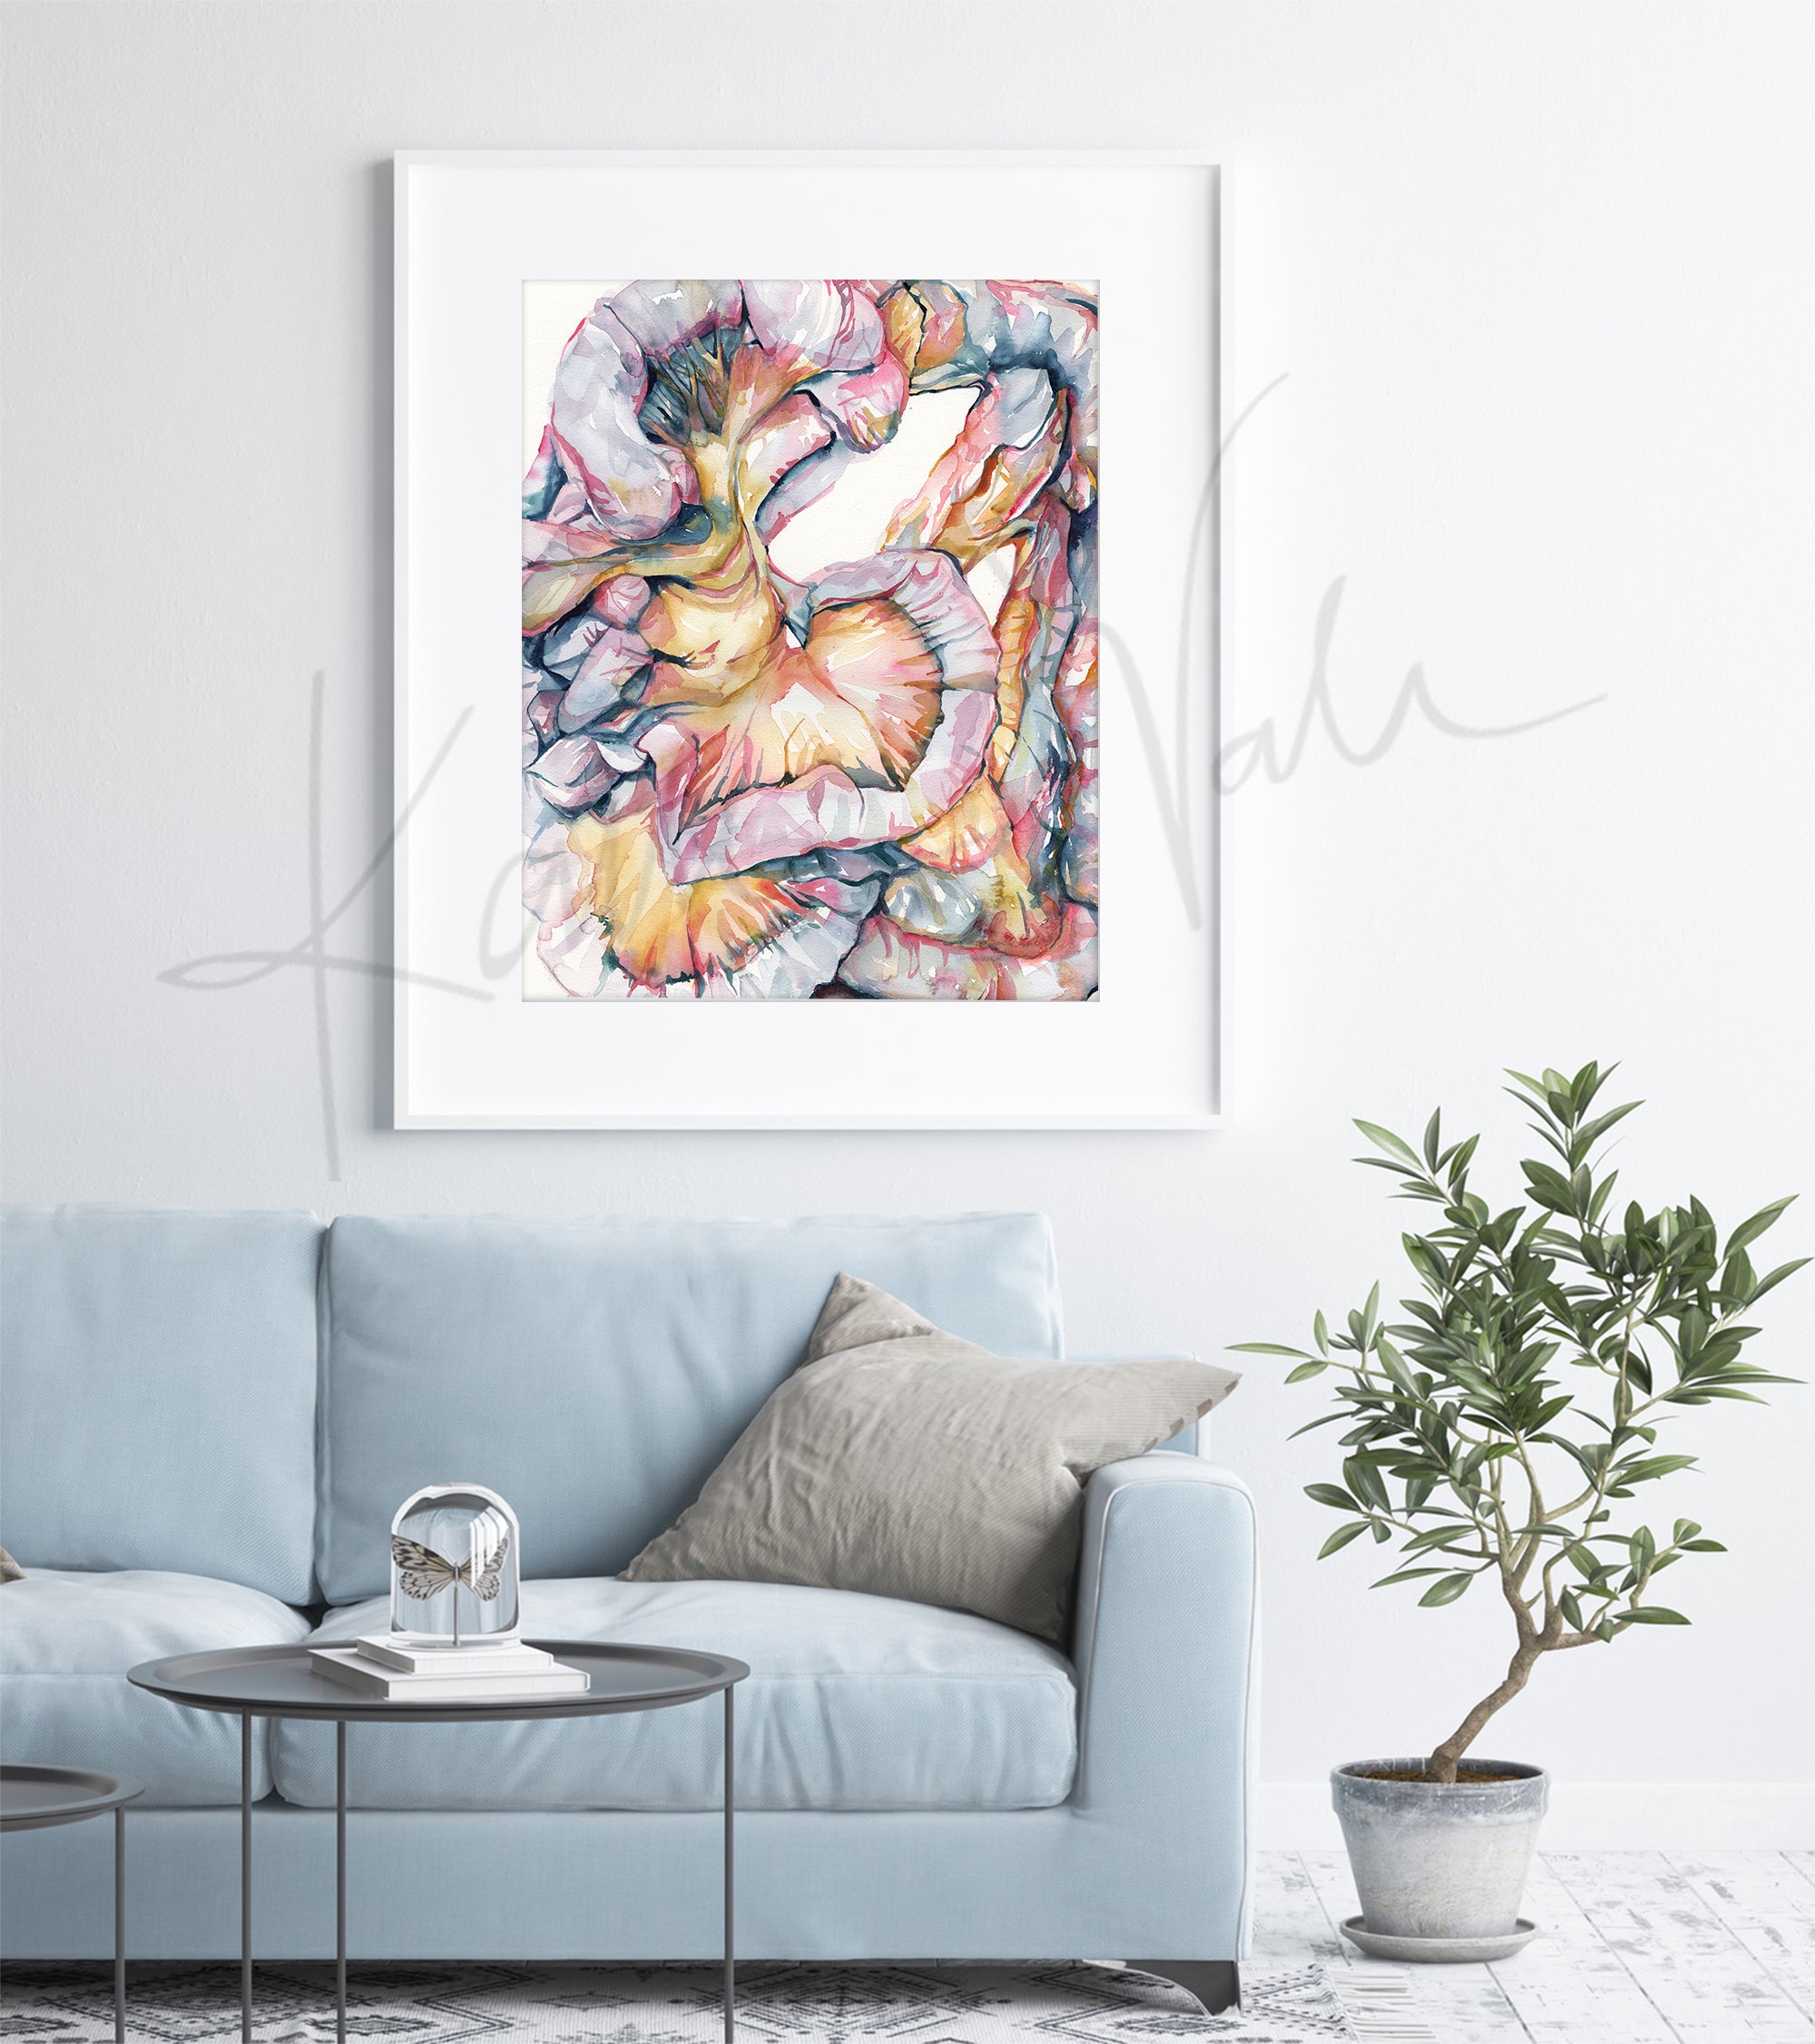 Framed watercolor painting of the intestines and mesentery folds in soft, light pastels. The painting is hanging over a blue couch.